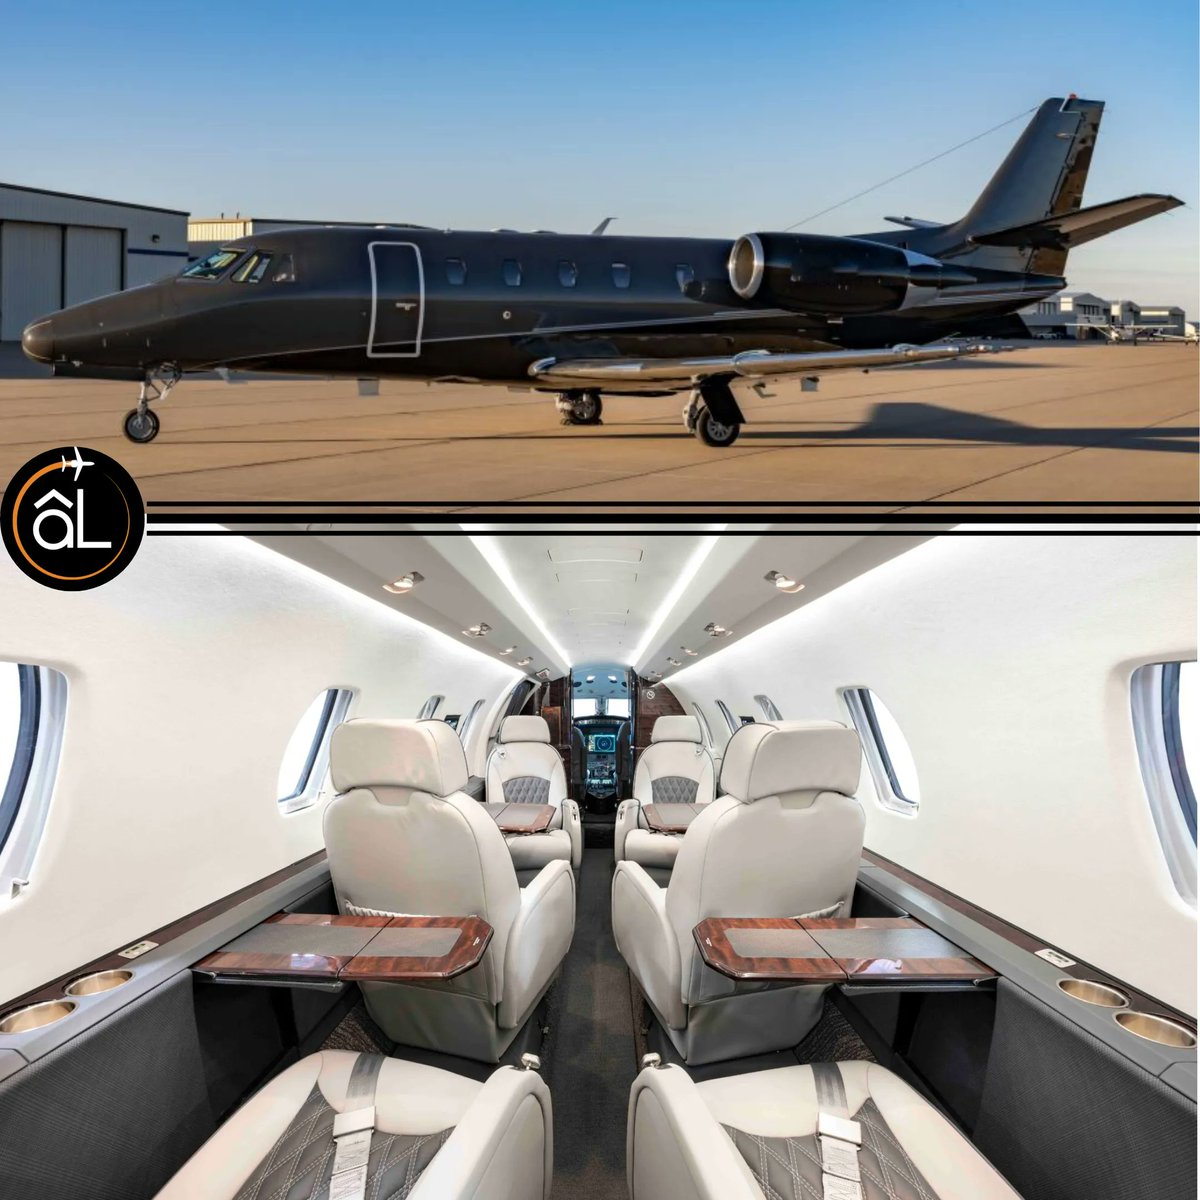 EMPTY LEG:
New York, NY -- Midwest
👥 8 passengers⠀⠀⠀⠀⠀⠀
📅 Available June 8 & 9, 2023
✈️ Citation Excel
📧mail@apexluxe.com.
#emptyleg #midwesttravel #NYCtravel #NYCjet #eastcoasttravel #chicago #indianapolis #newyork #citation #Citationxl #summertravel #oneway